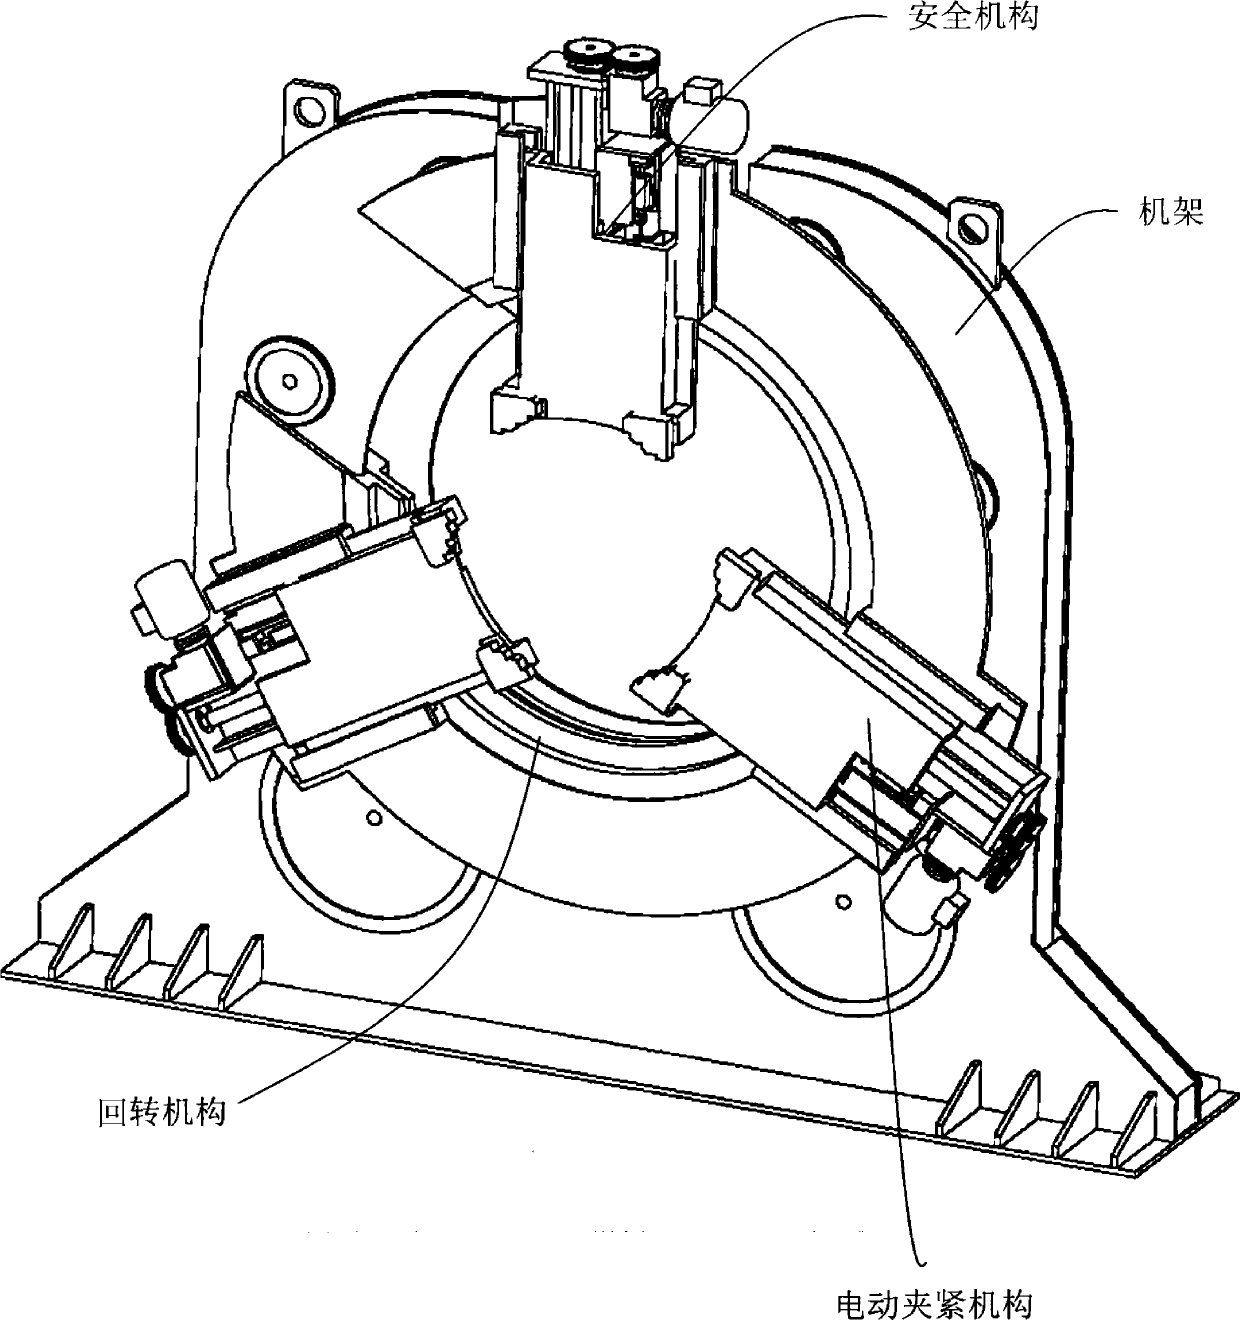 Alignment clamp with top opening and 360-degree rotation function